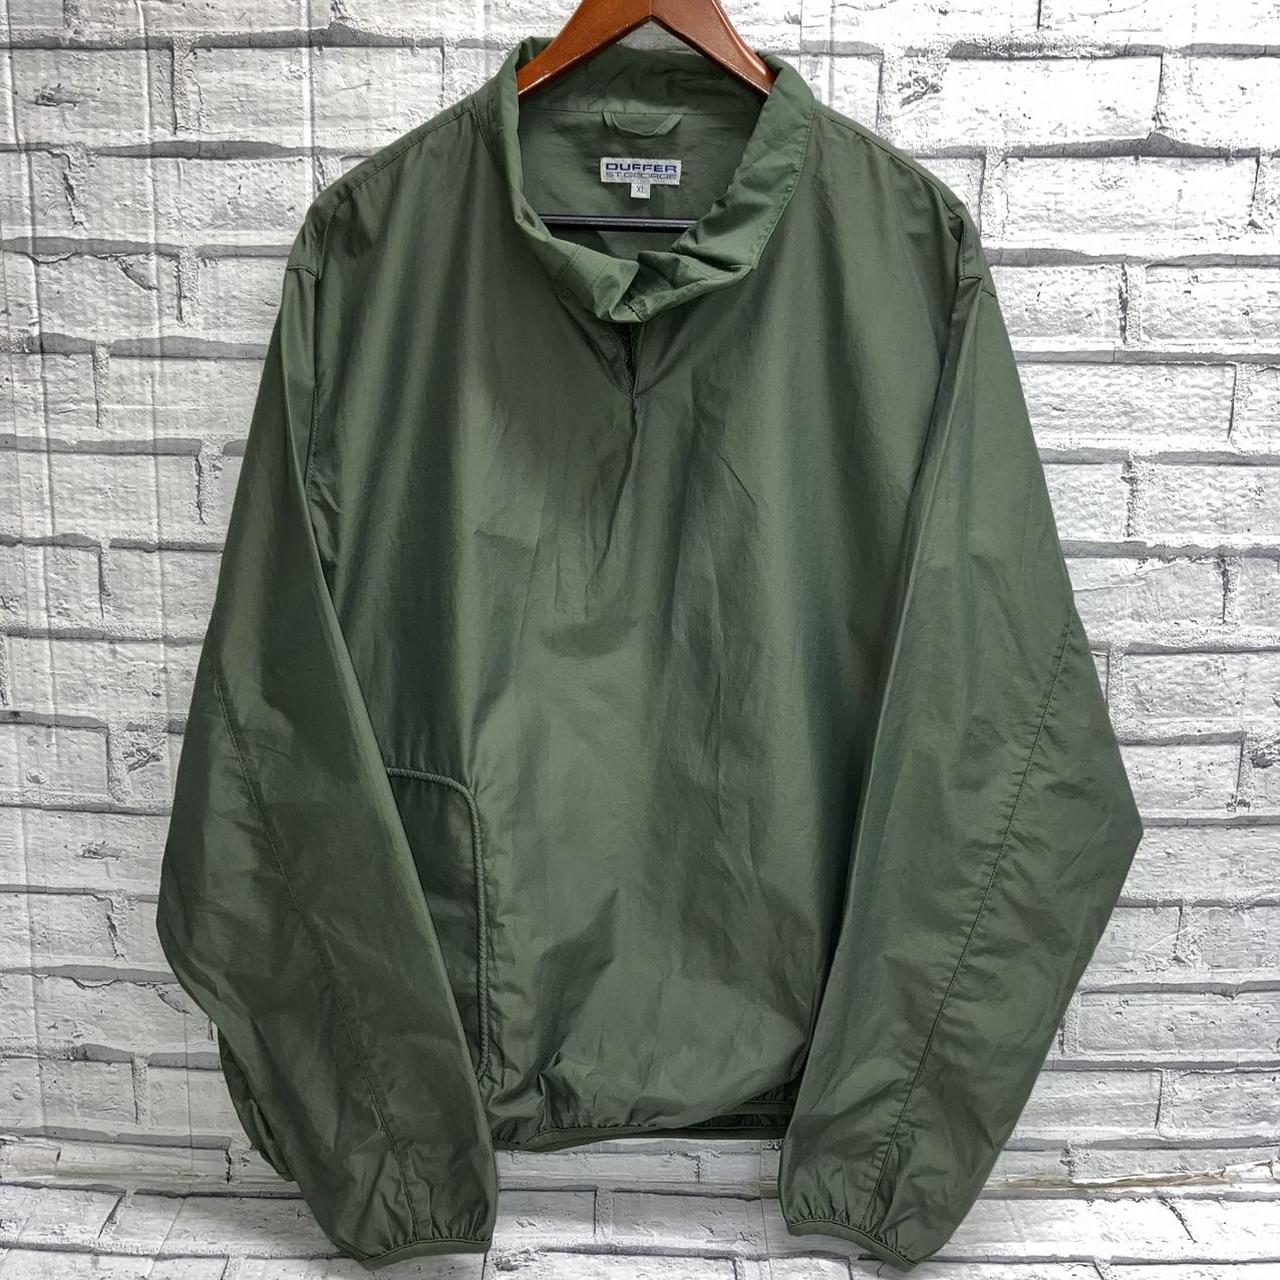 Duffer St George Green pull over jacket with 1... - Depop